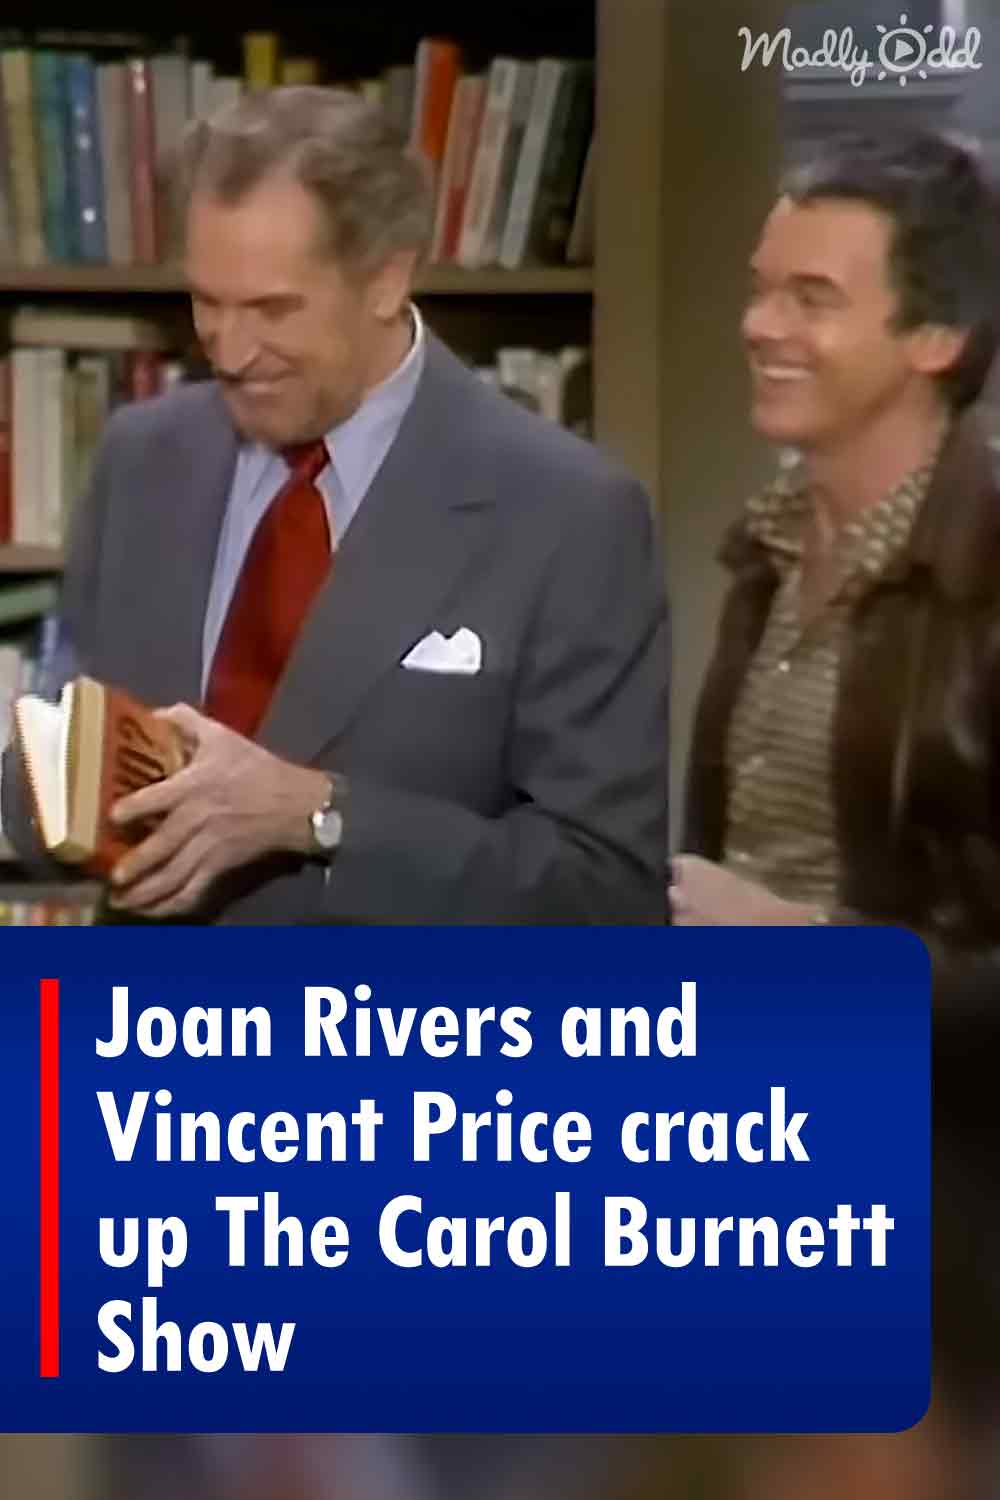 Joan Rivers and Vincent Price crack up The Carol Burnett Show